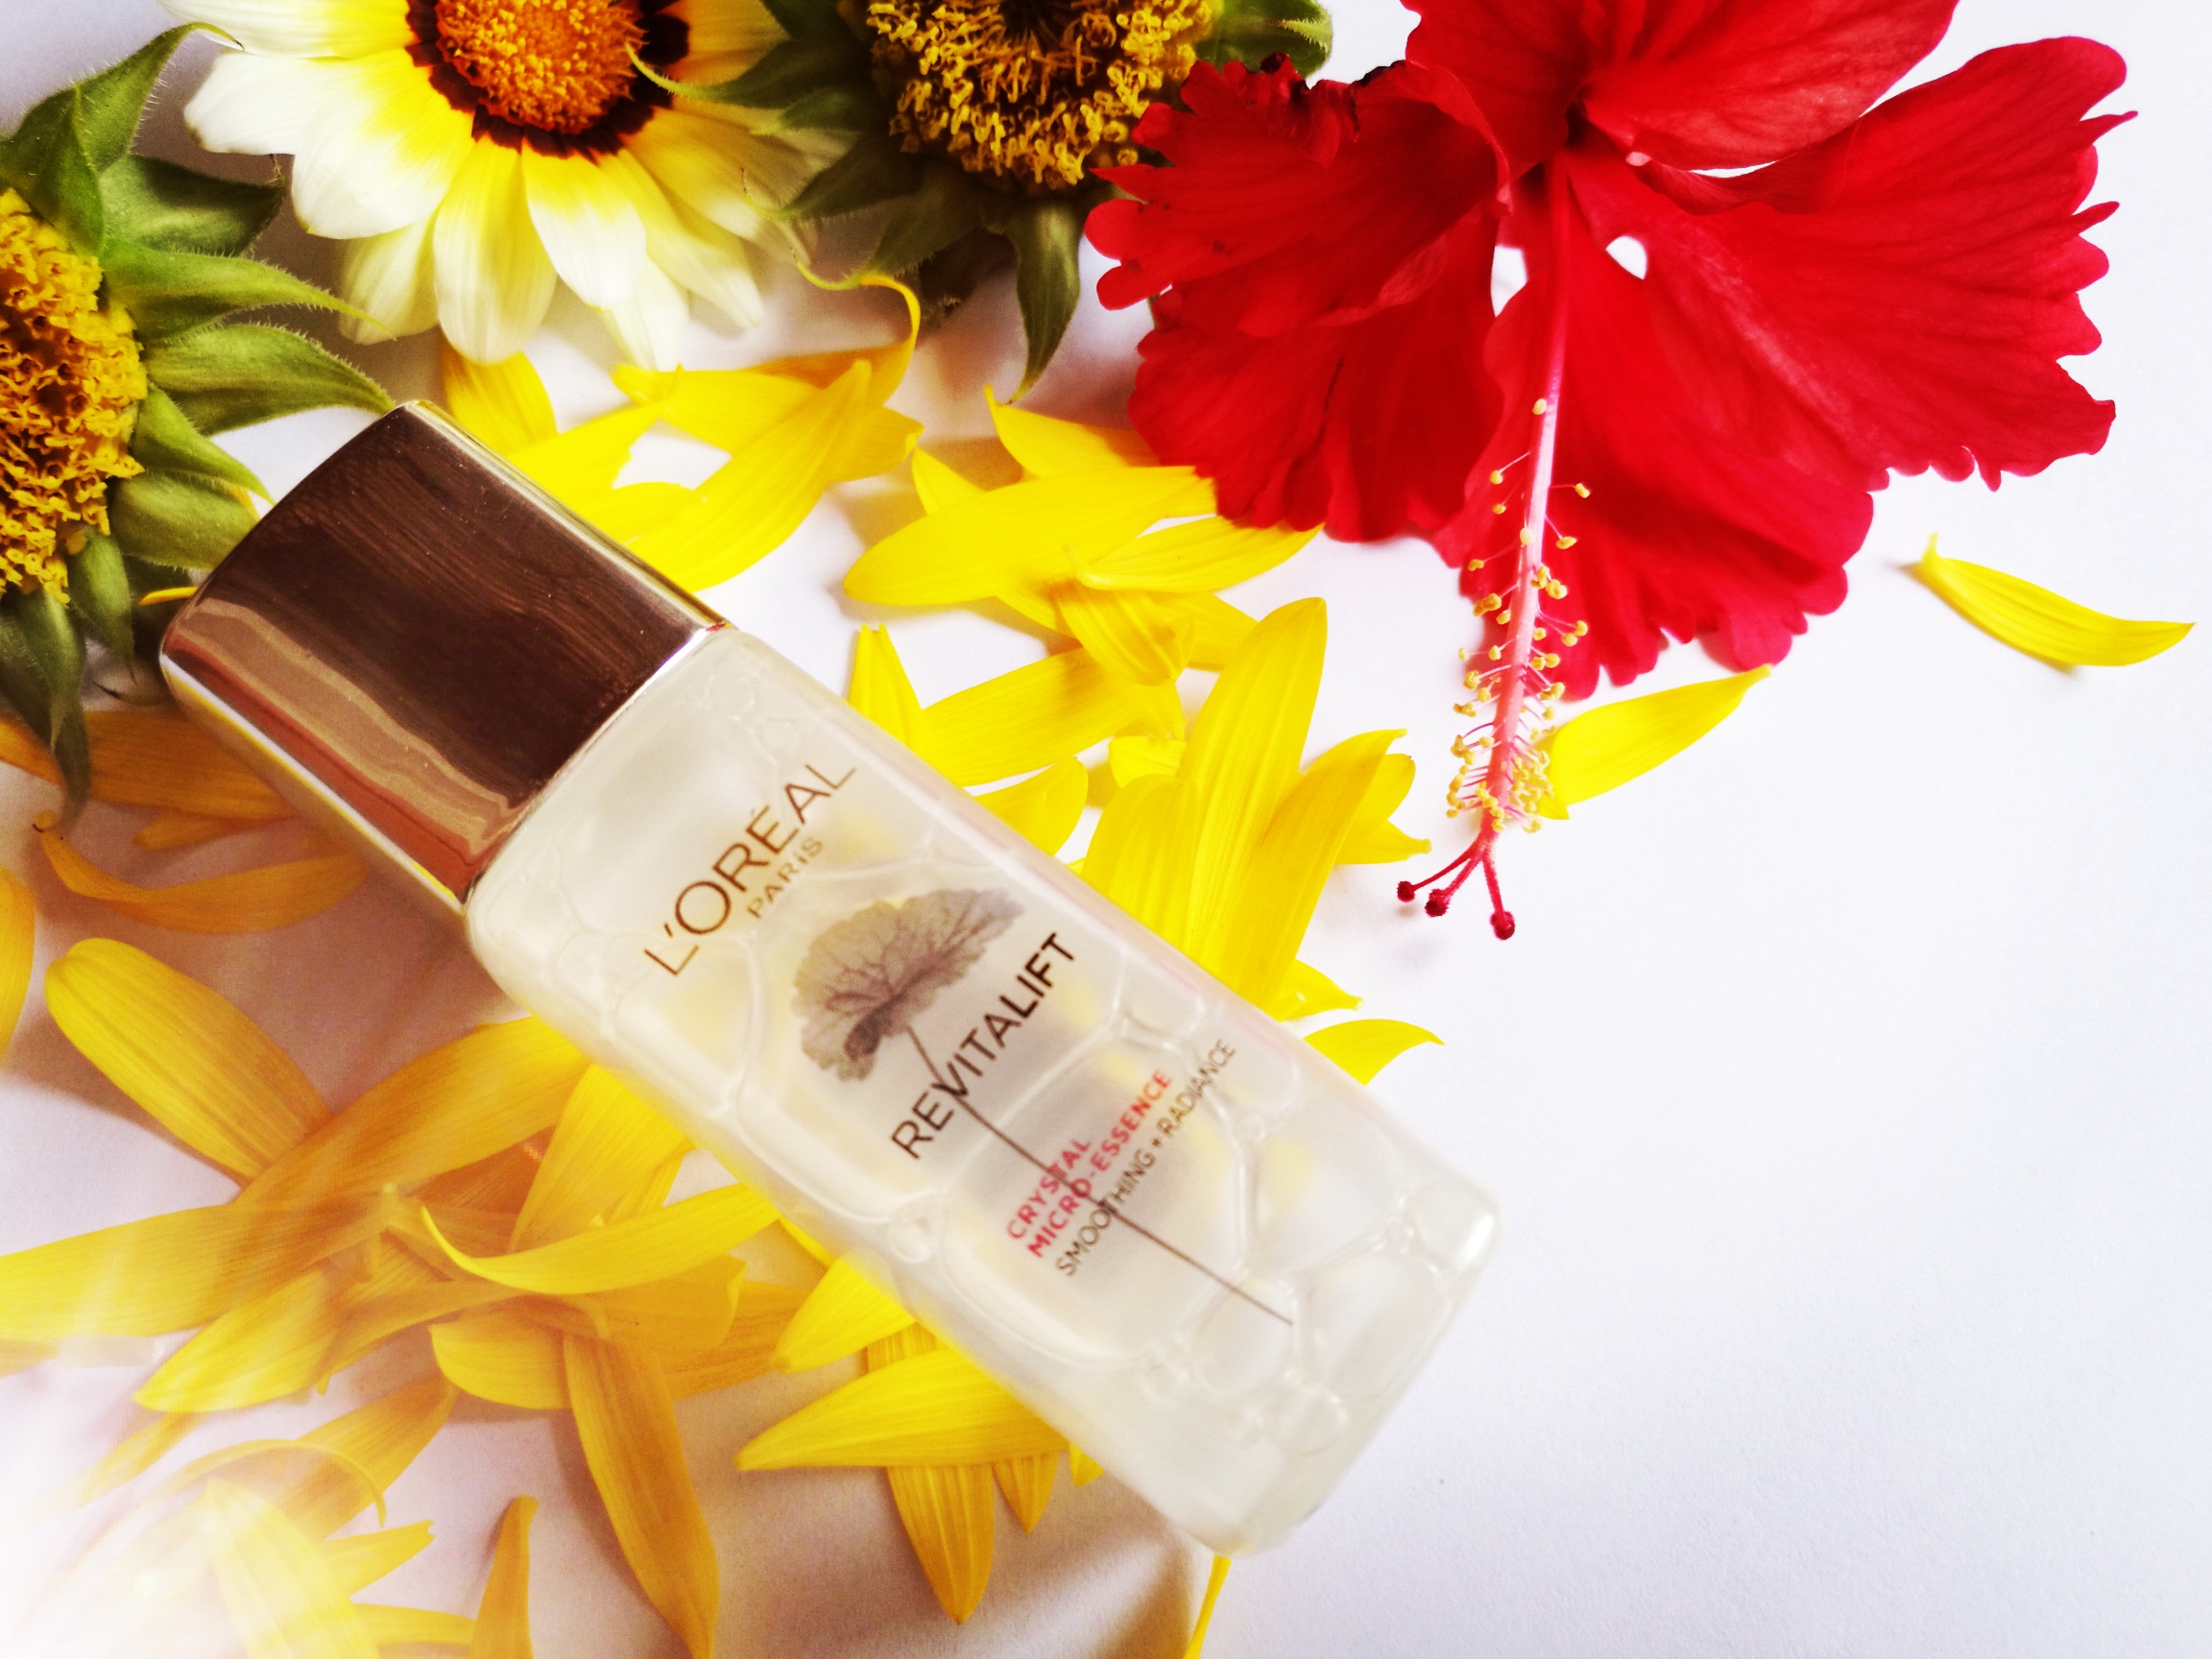 L’Oreal Revitalift Crystal Micro Essence Review